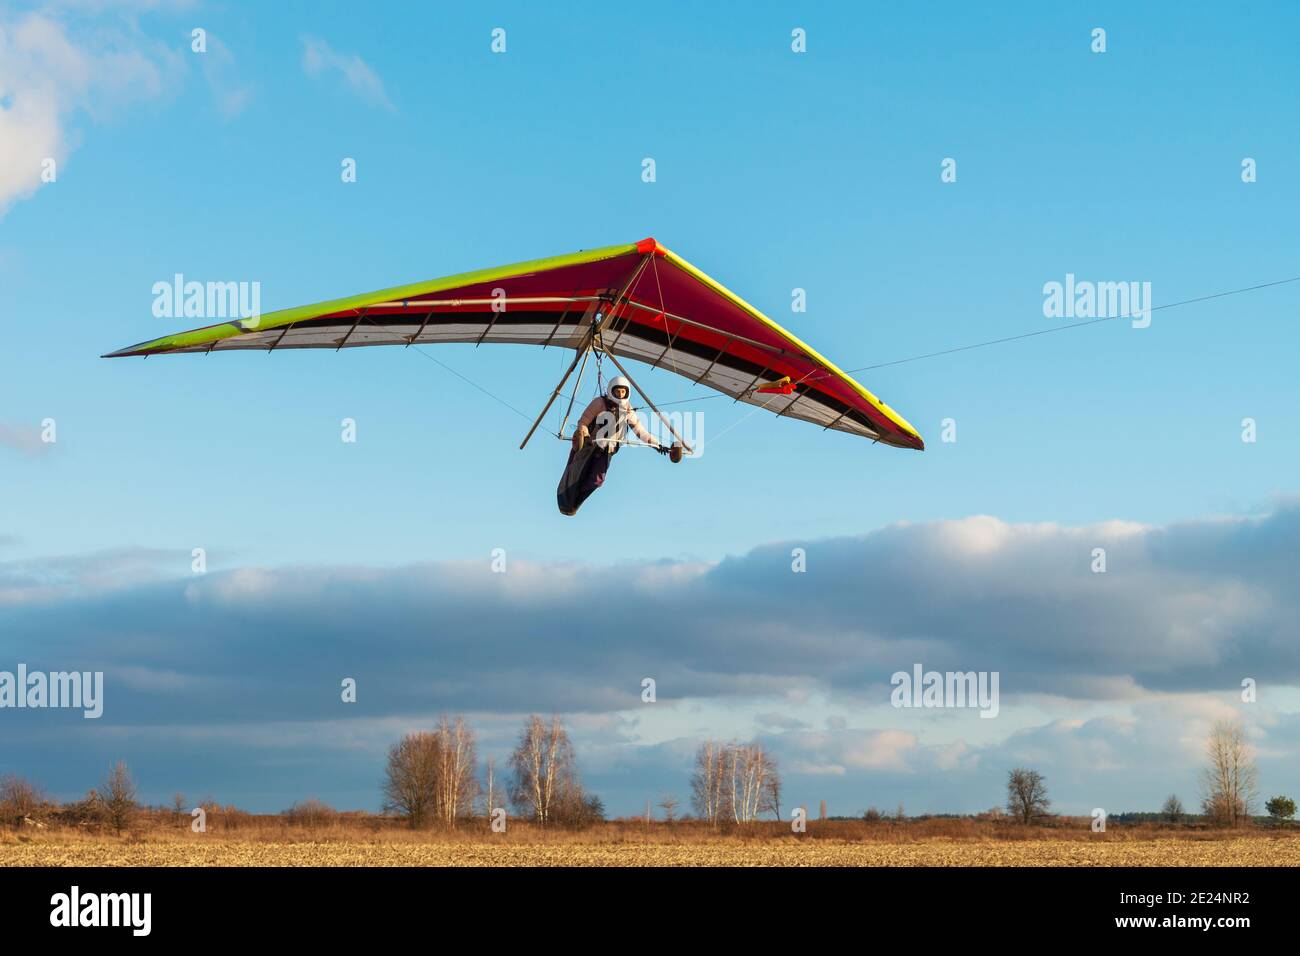 Brave girl student is mastering hang gliding sport. Extreme sports activity Stock Photo